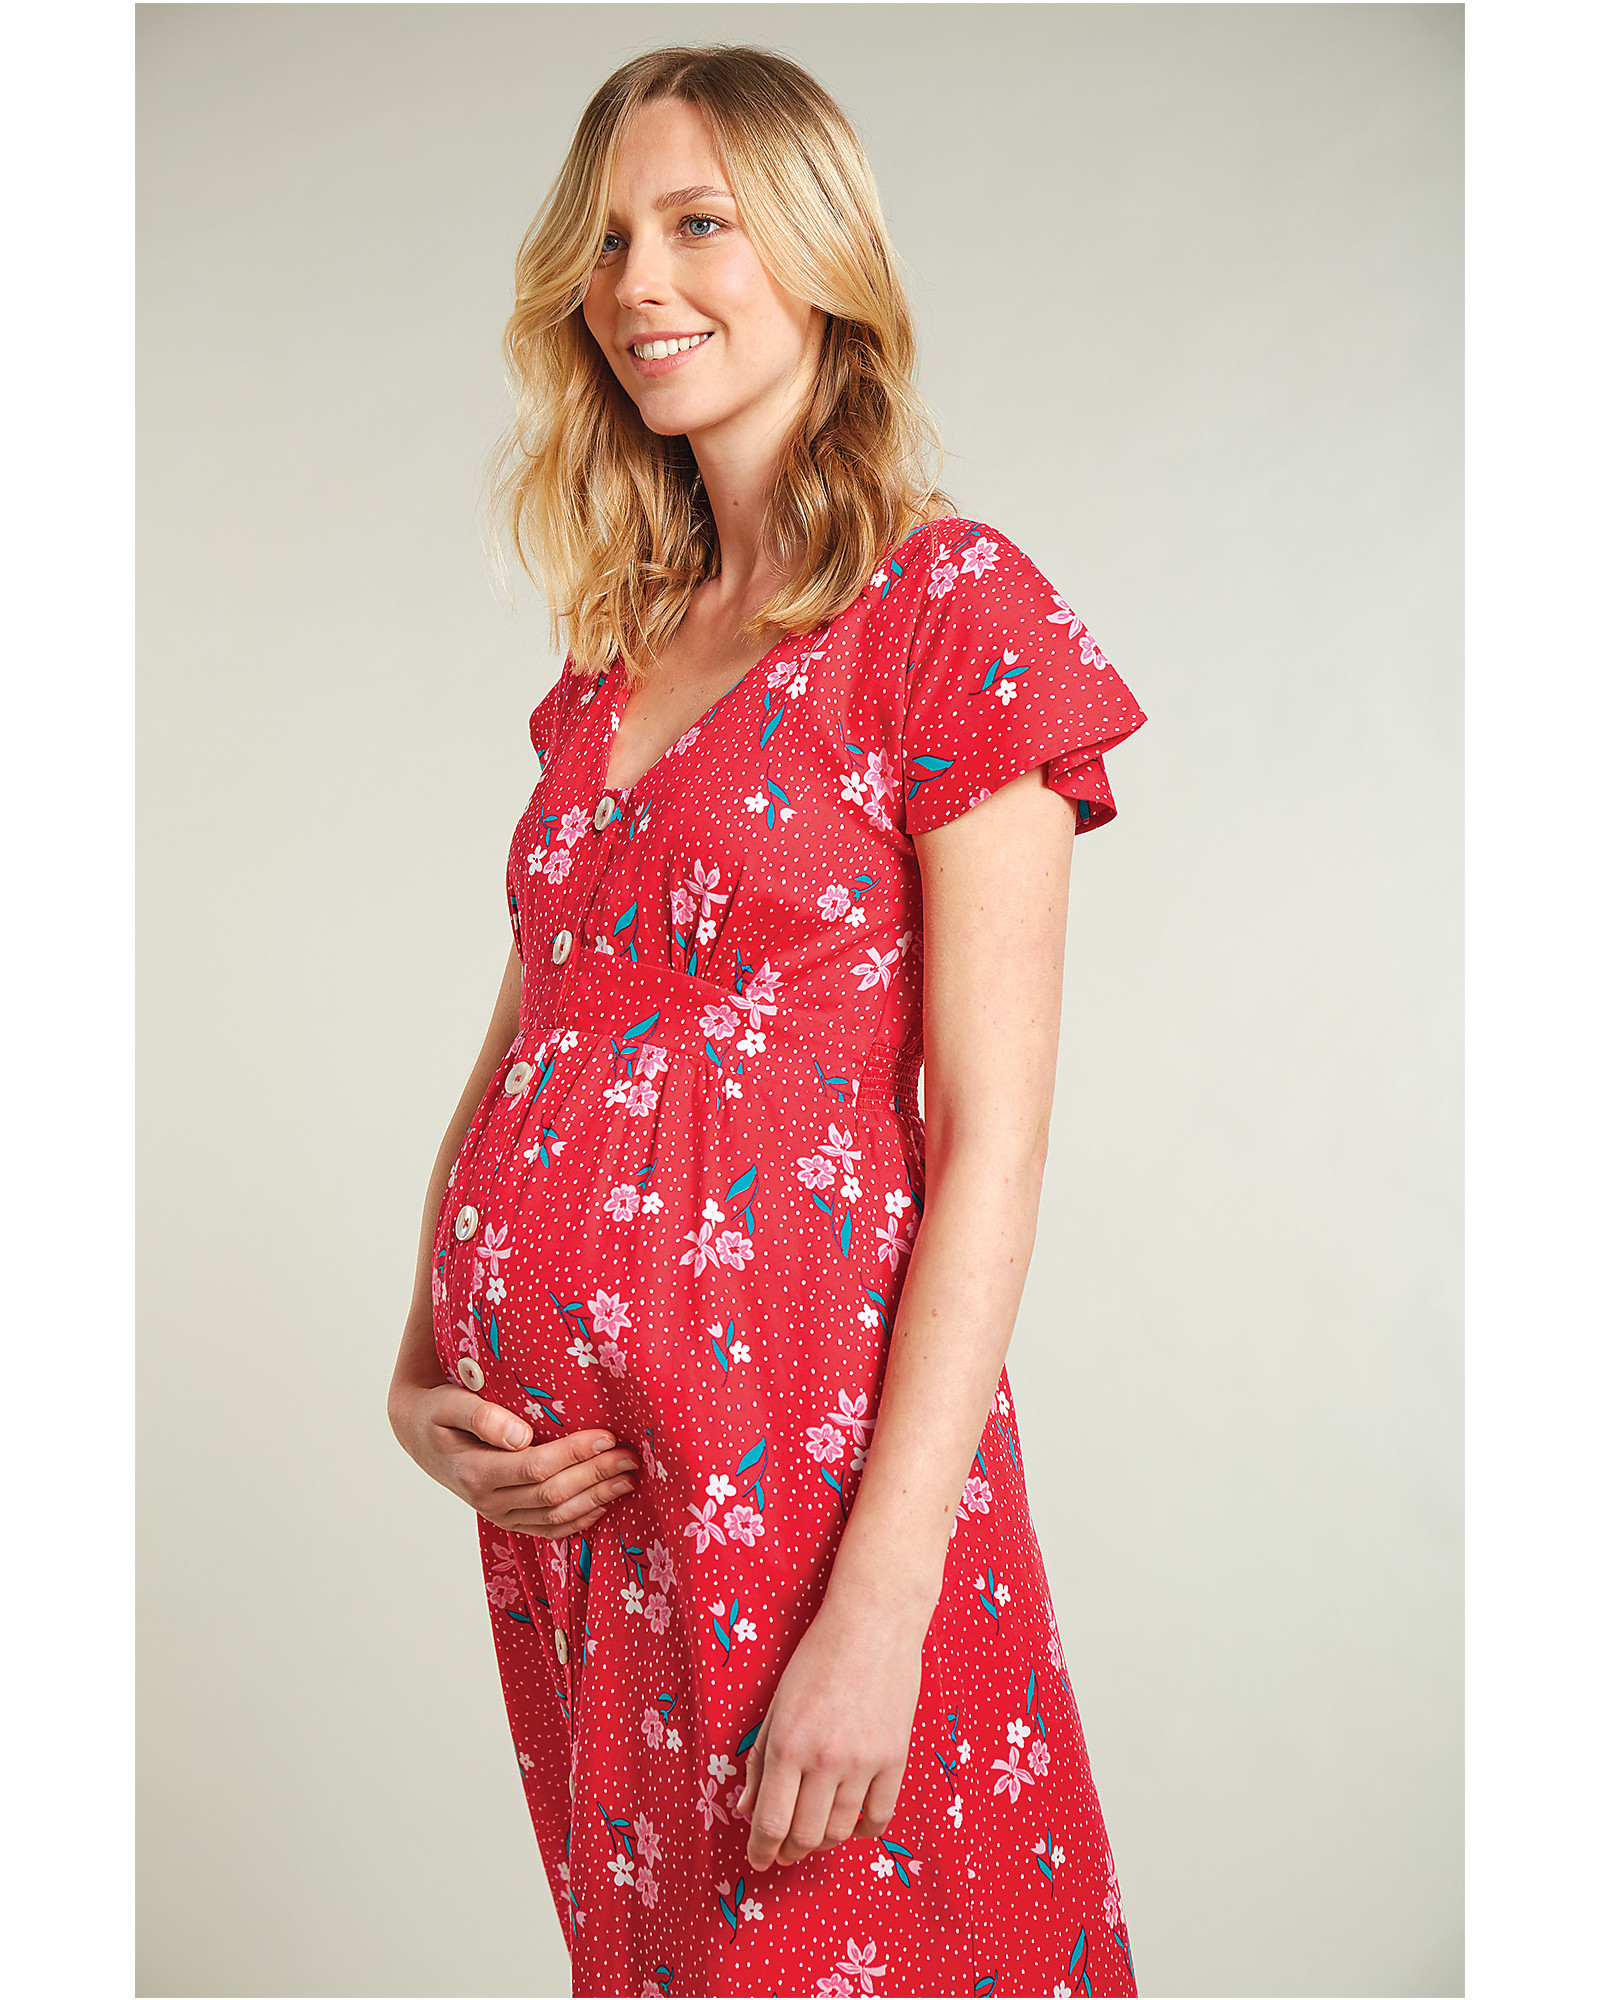 Seraphine Women's Maternity & Nursing Red Floral Woven Tee sz 8